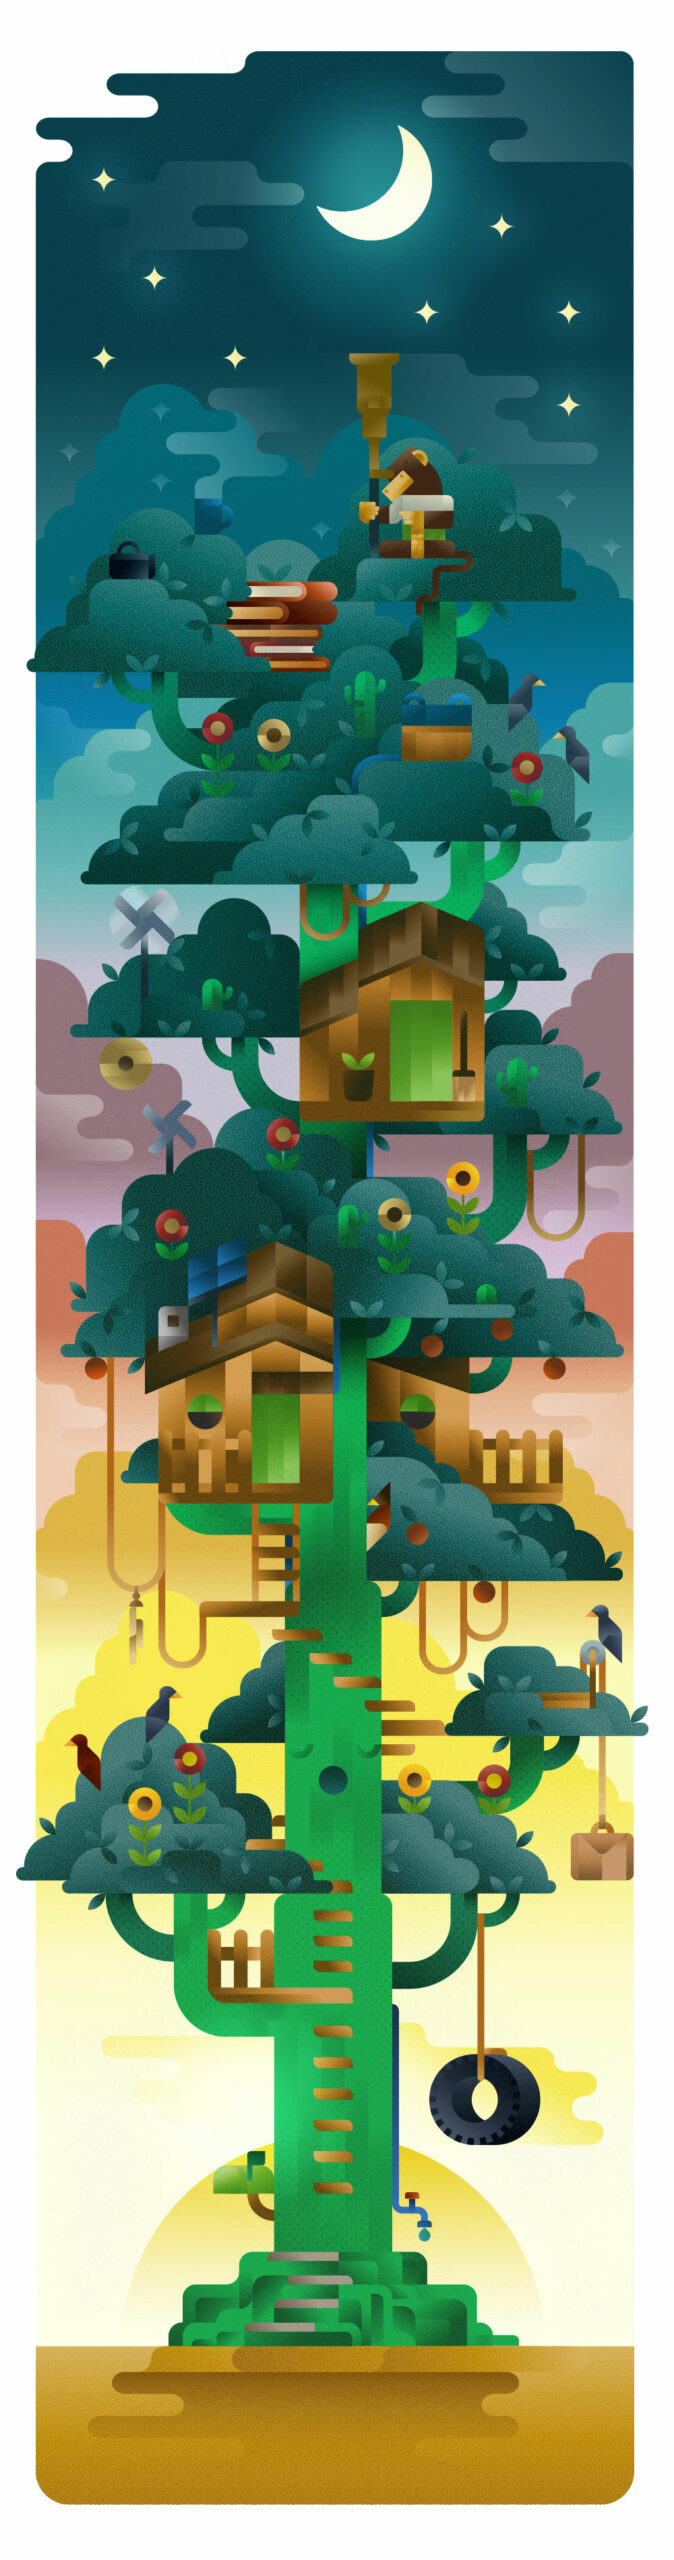 A giant cactus tree holding the house of a smart monkey that watch the sky with a telescope, illustration by Francesco Faggiano illustrator